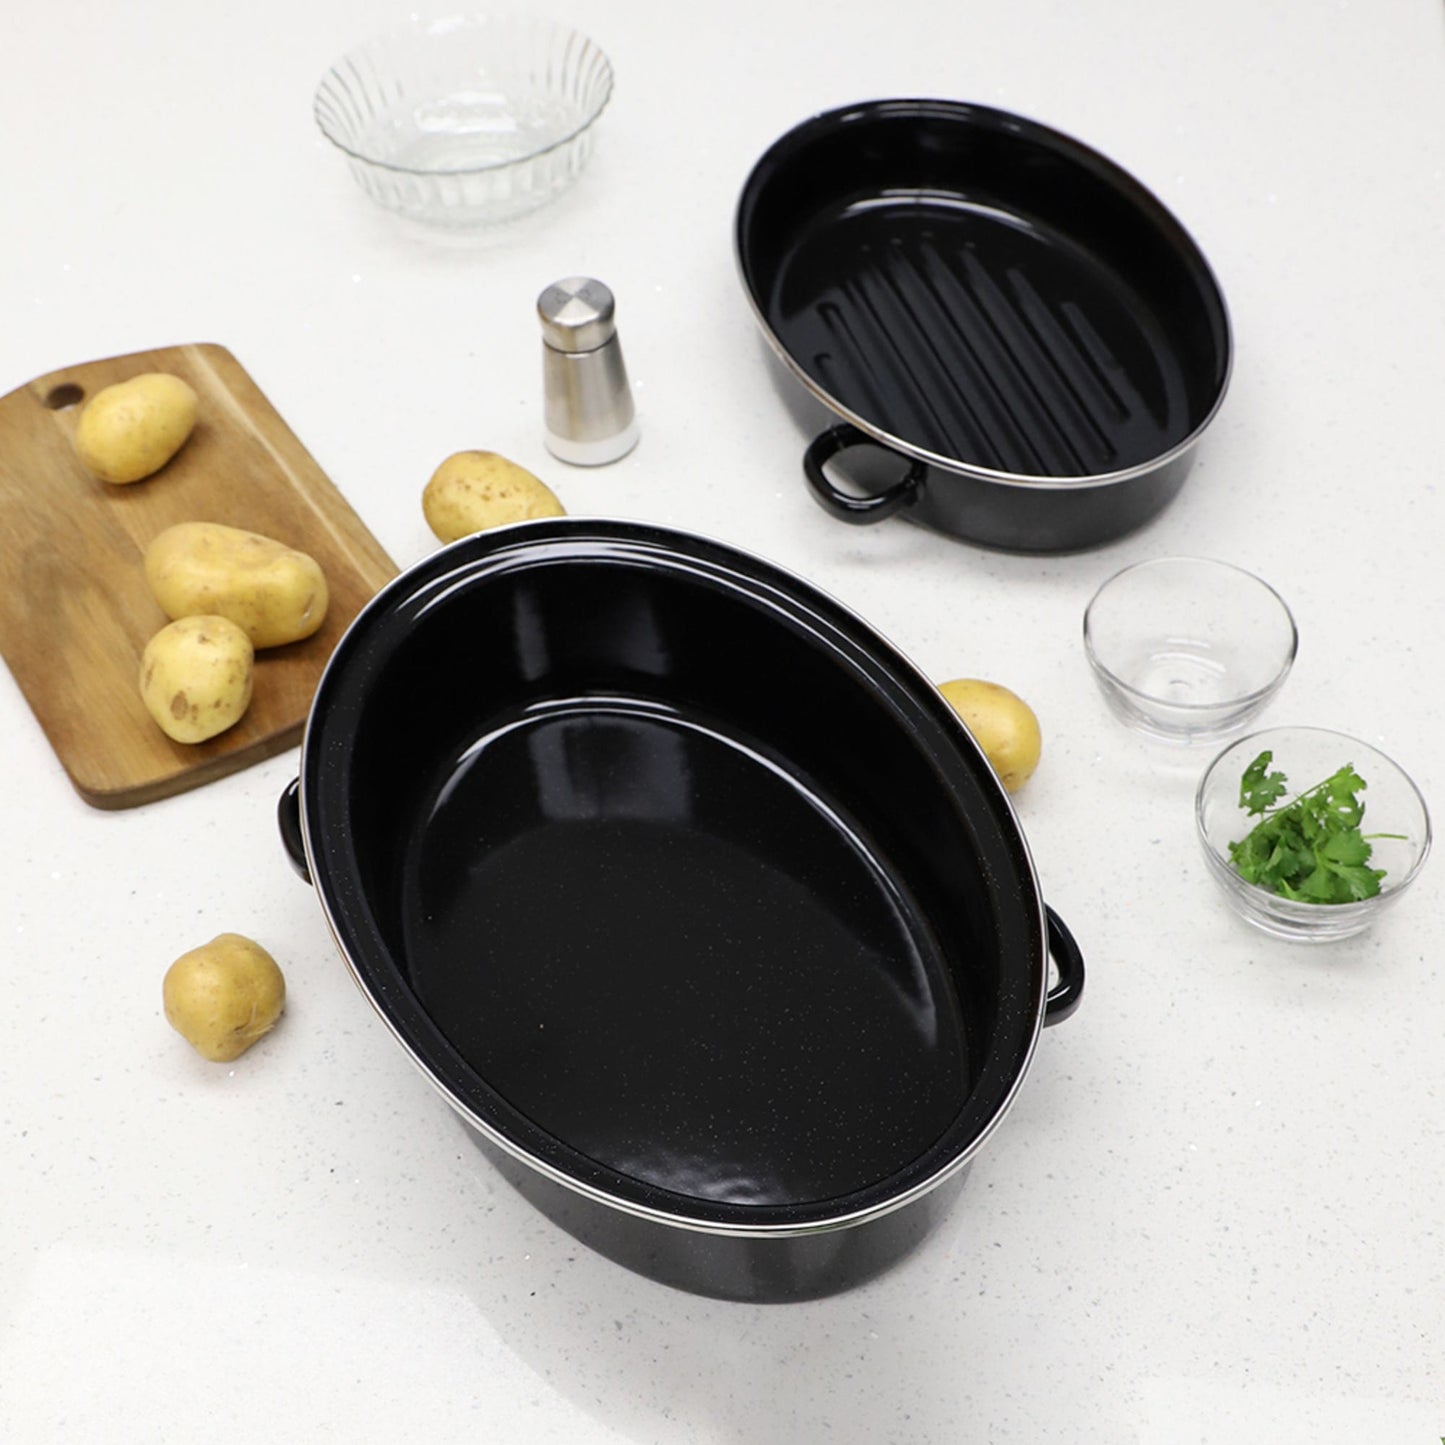 Deep Oval Natural Non-Stick 14” Enameled Carbon Steel Roaster Pan with Lid, Black